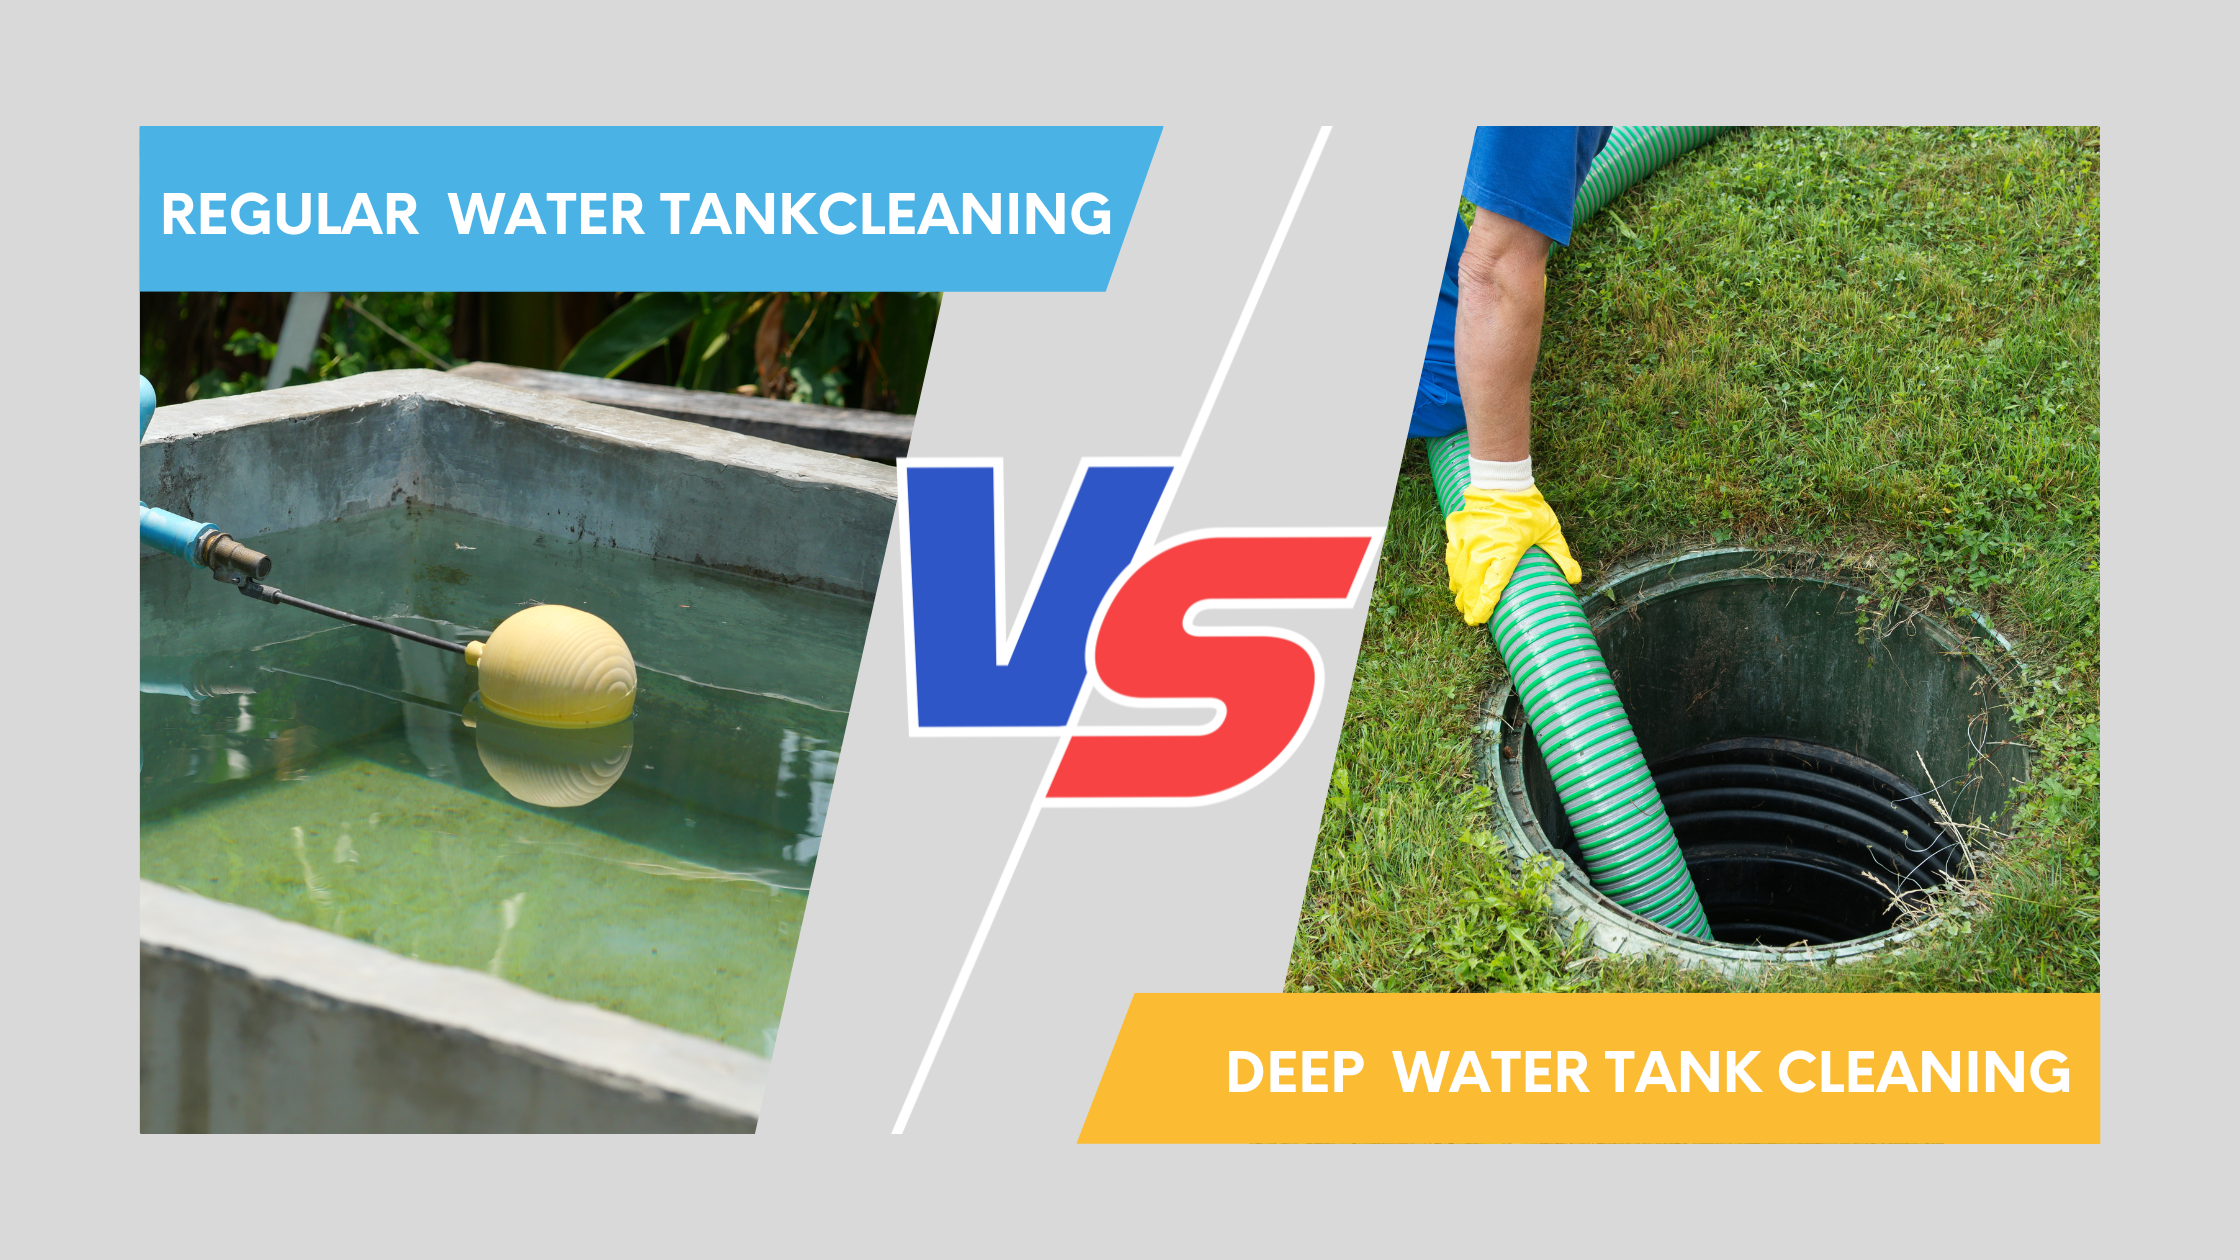 Regular cleaning vs deep cleaning of water tank